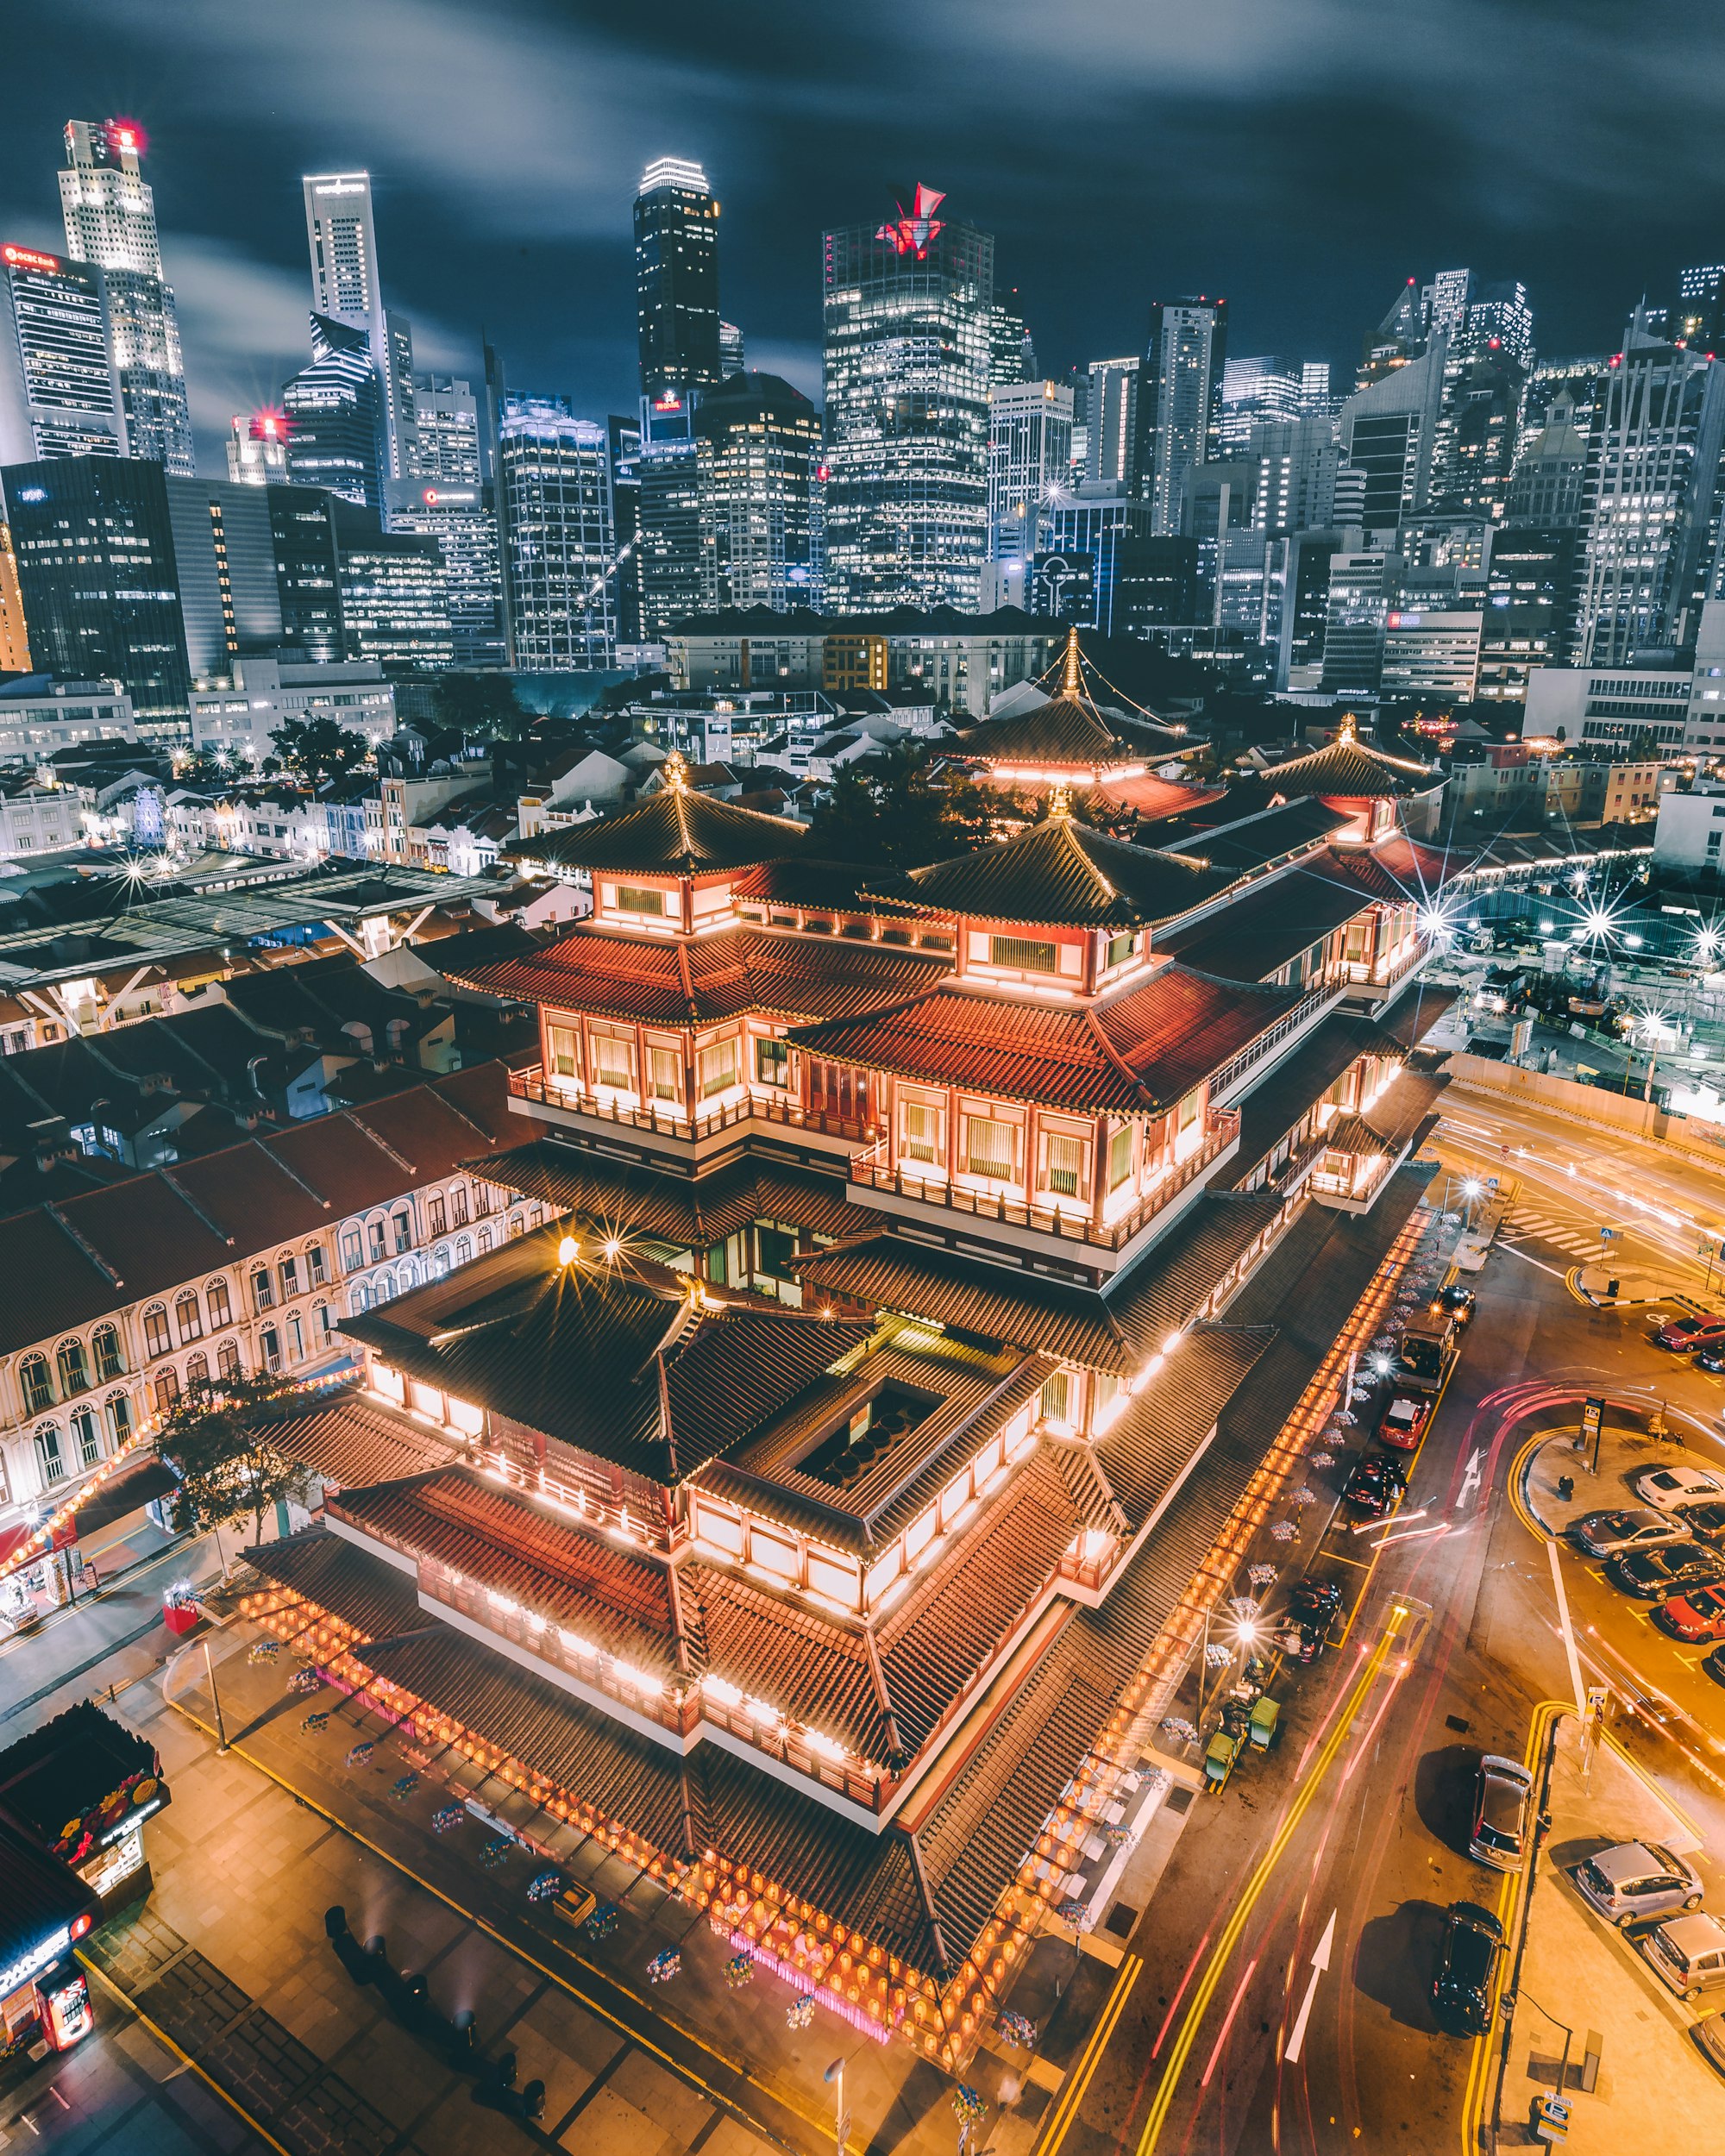 The Buddha Tooth Relic Temple and Museum only lights up a few times in a year during special occasions. I was lucky to capture this that night.